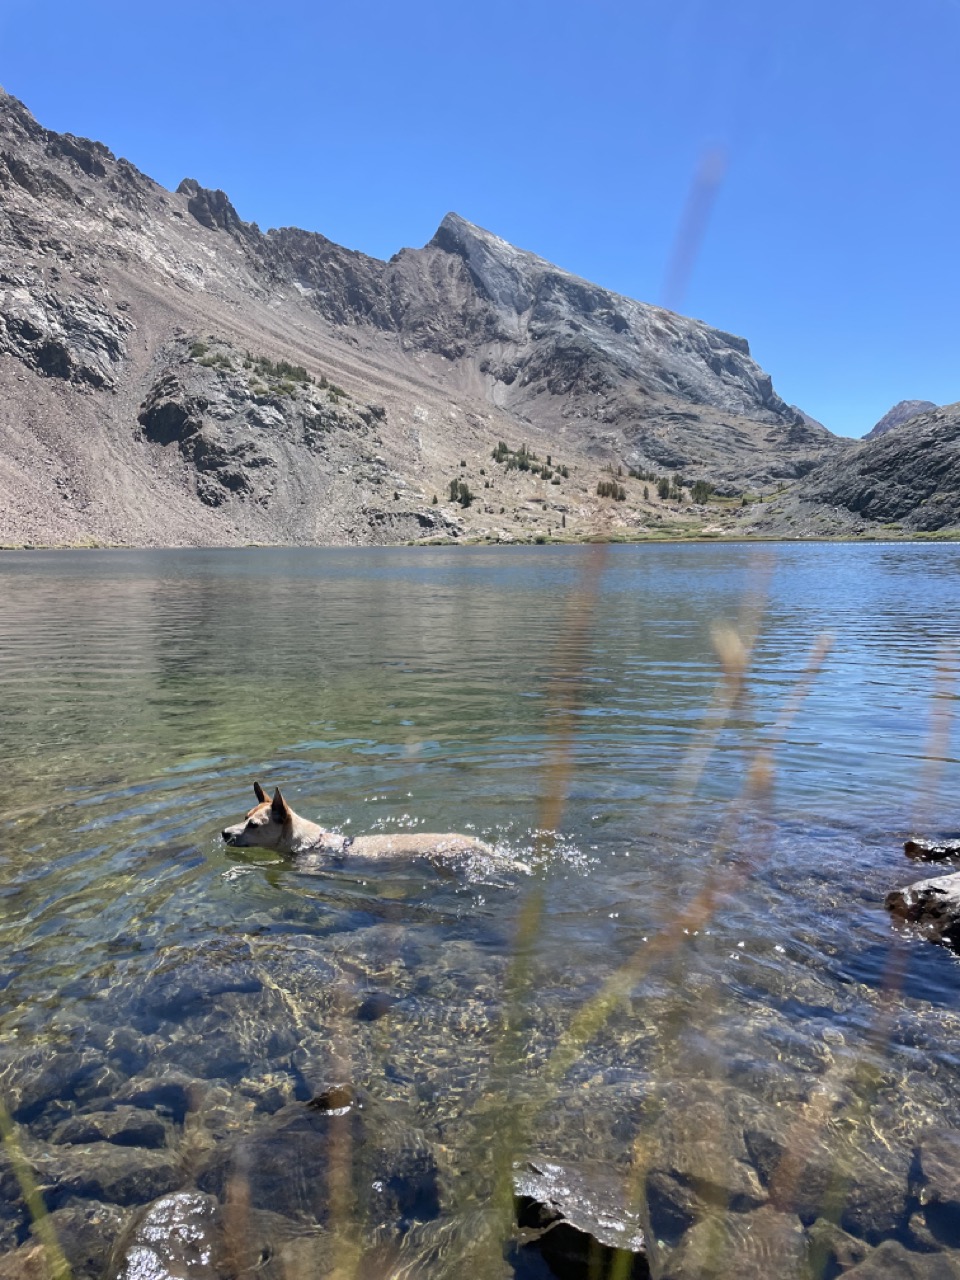 Cooling off with a swim in Bright Dot Lake, with views of Baldwin